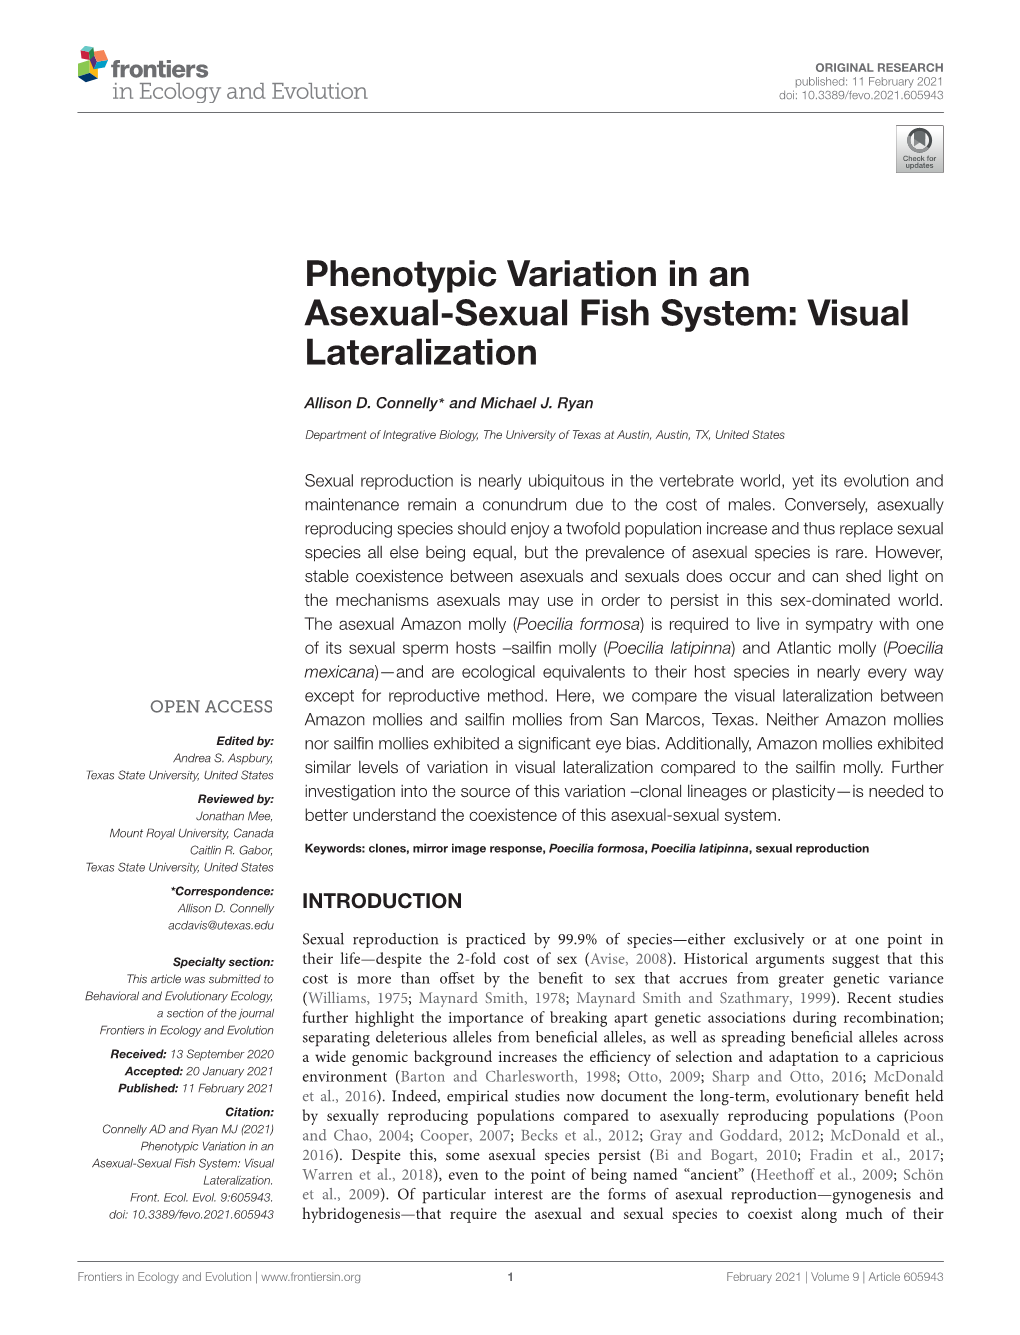 Phenotypic Variation in an Asexual-Sexual Fish System: Visual Lateralization